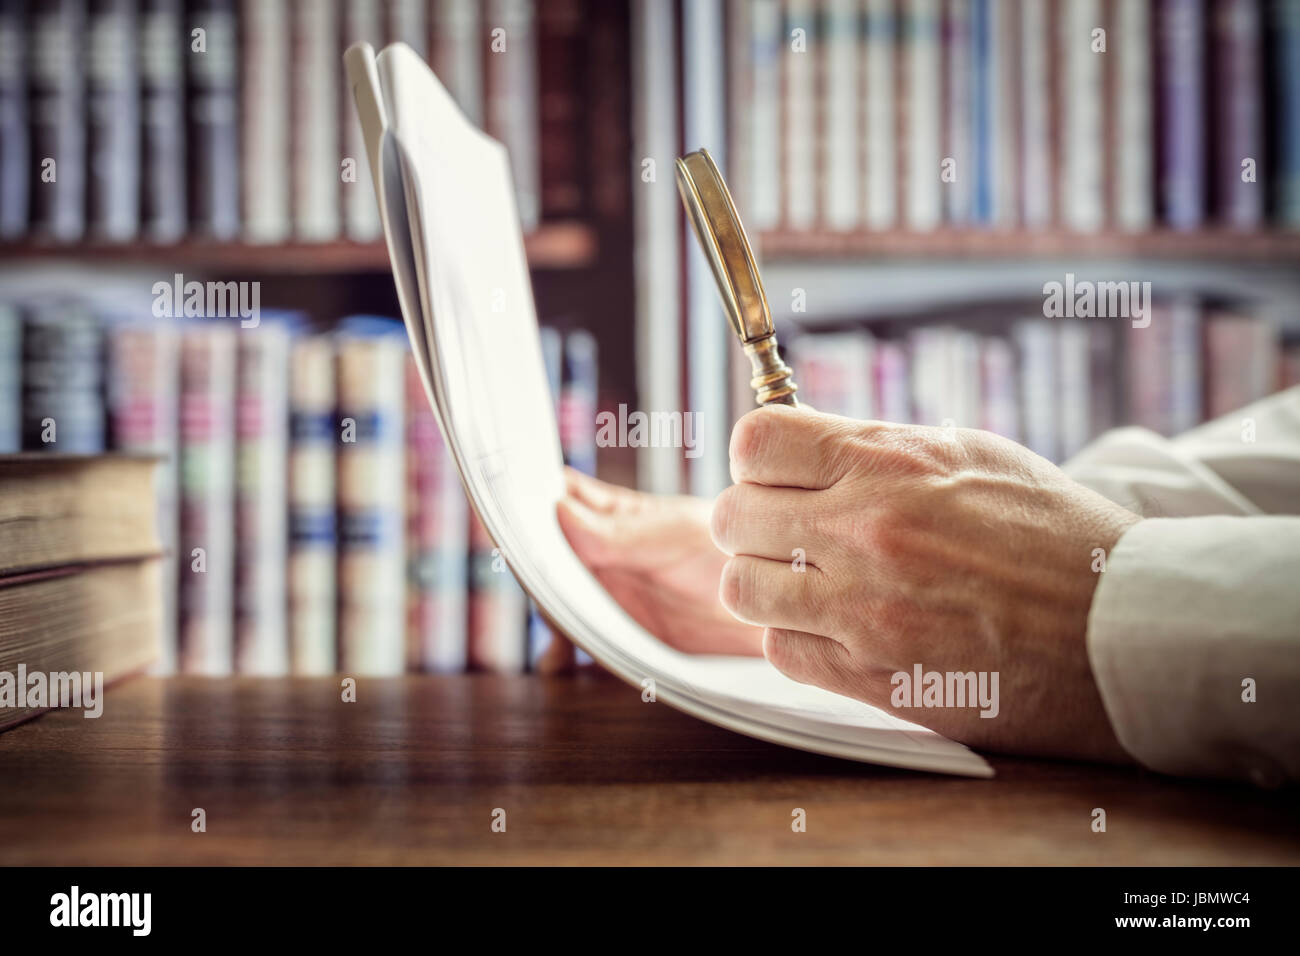 Businessman reading documents with magnifying glass concept for analyzing a finance agreement or legal contract Stock Photo